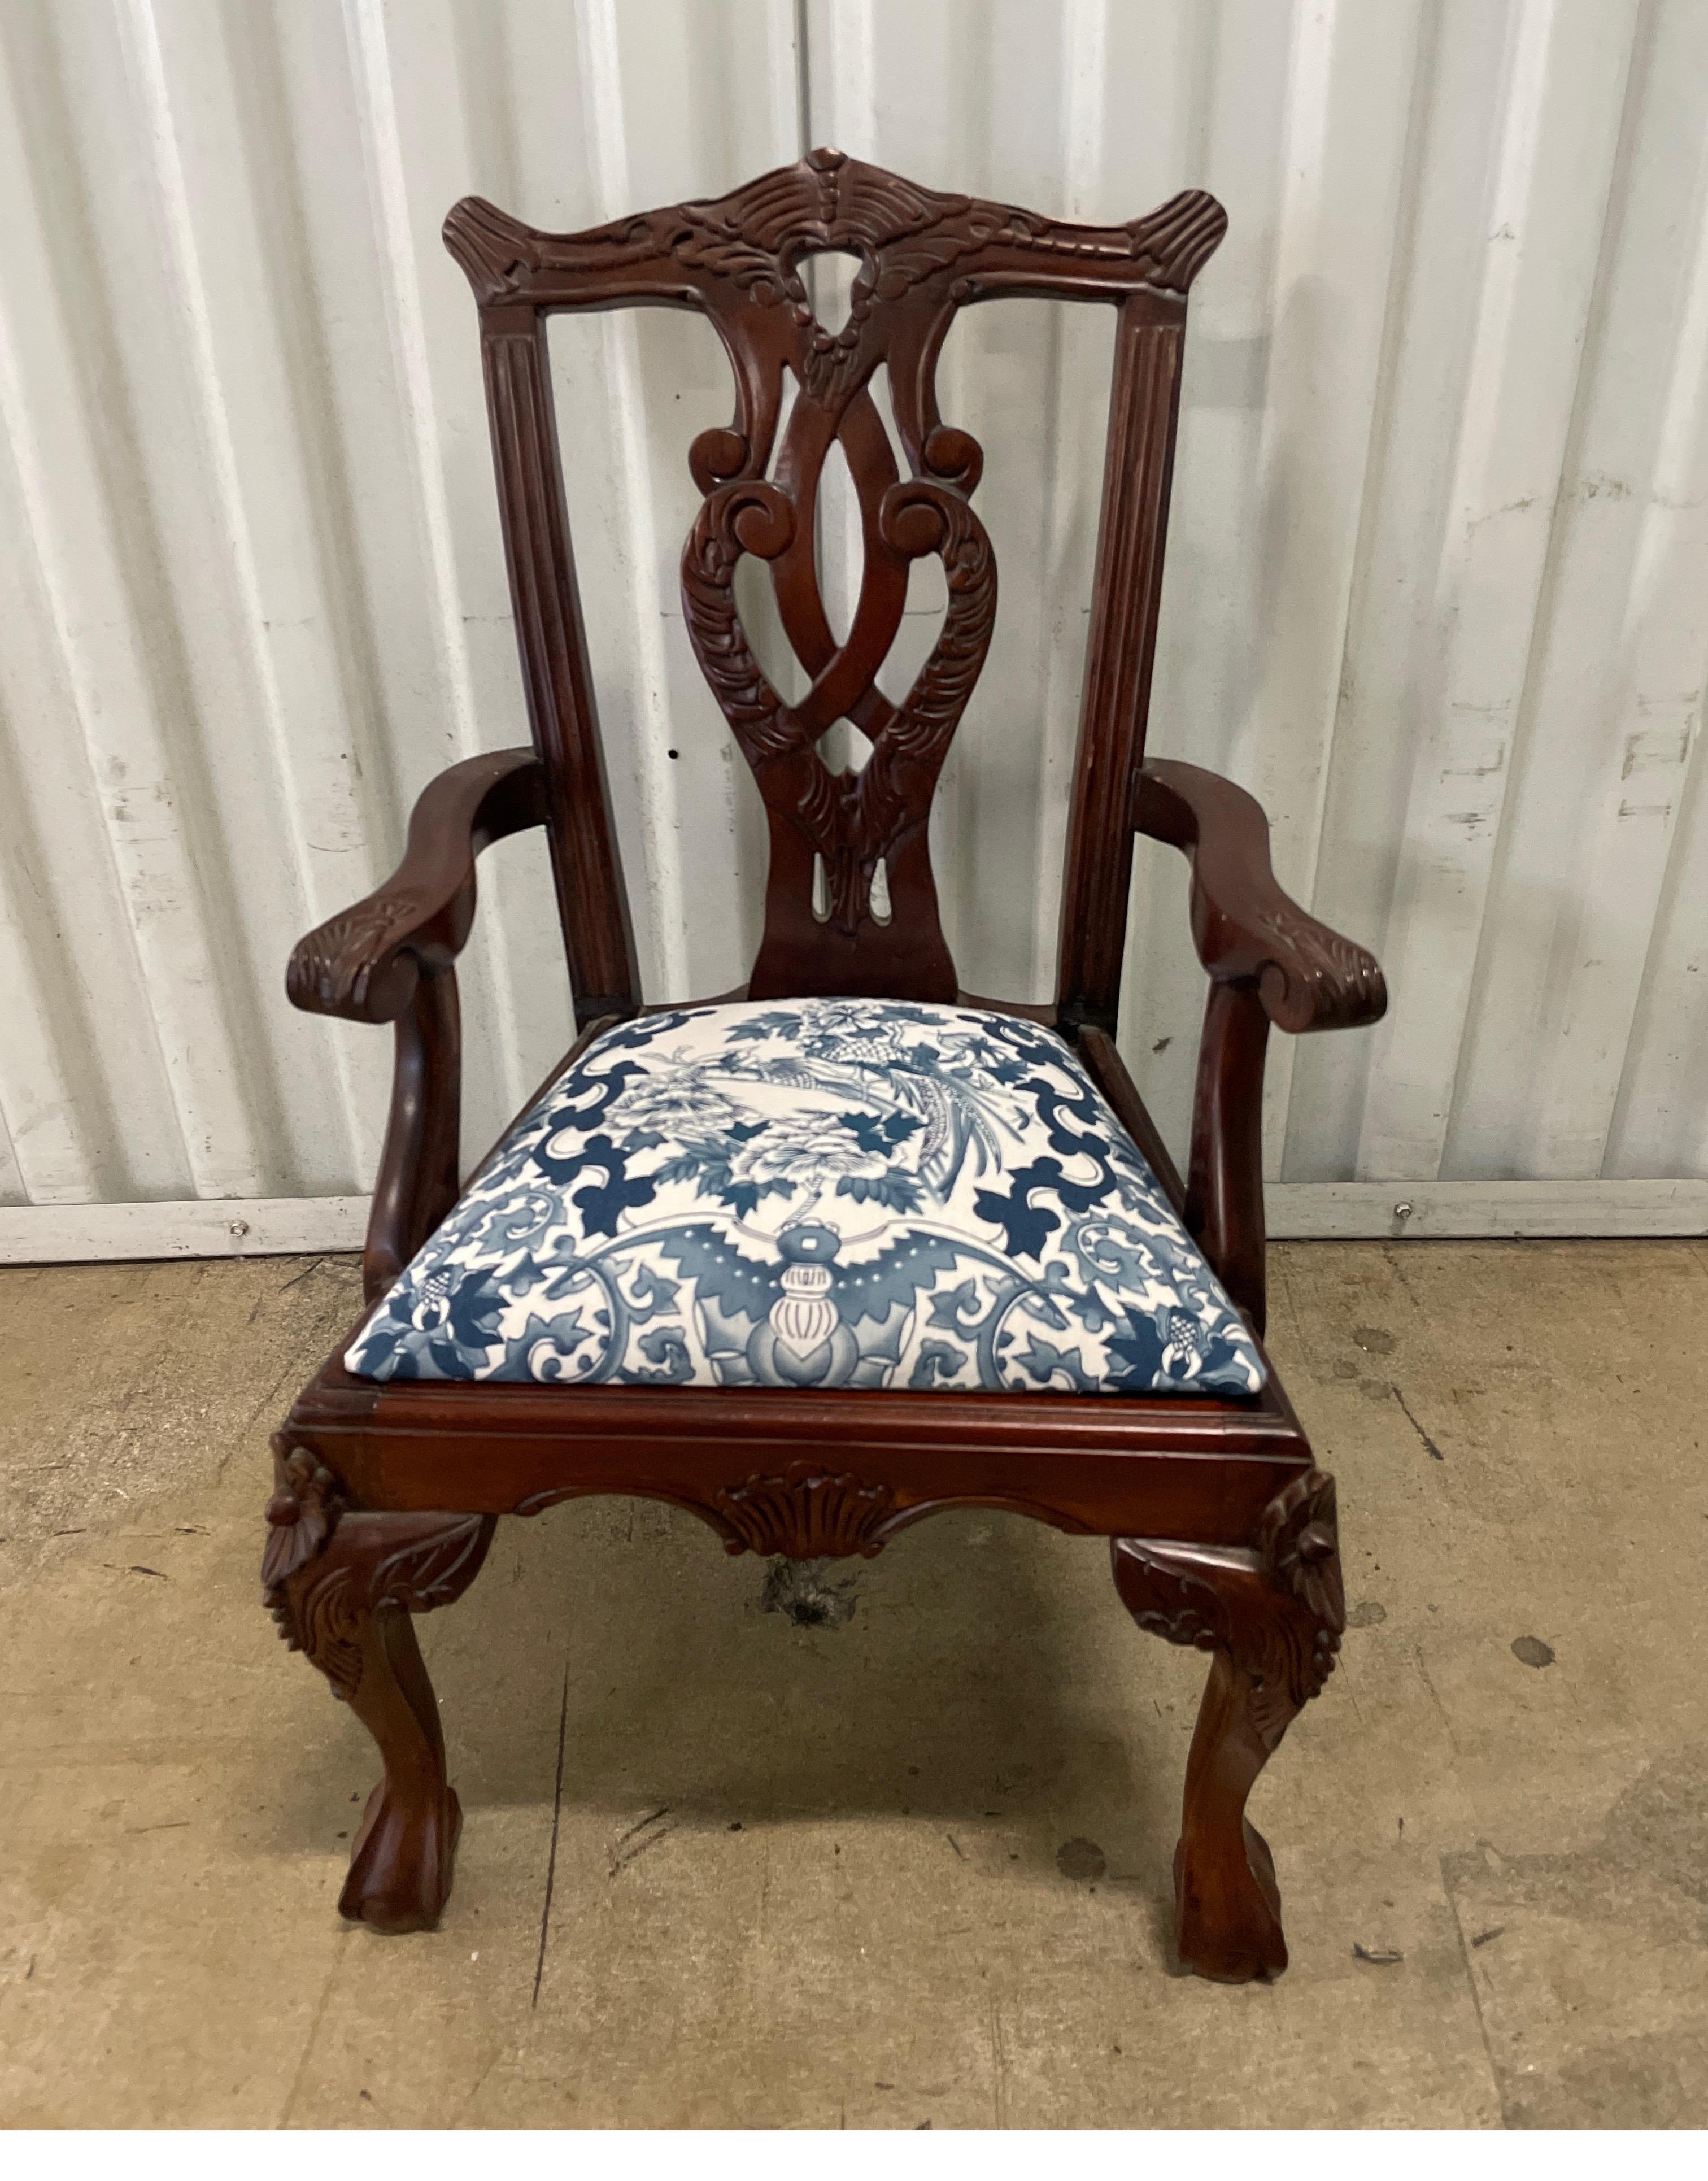 Miniature Chinese Chippendale style child's chair with Ralph Lauren fabric seat cushion.